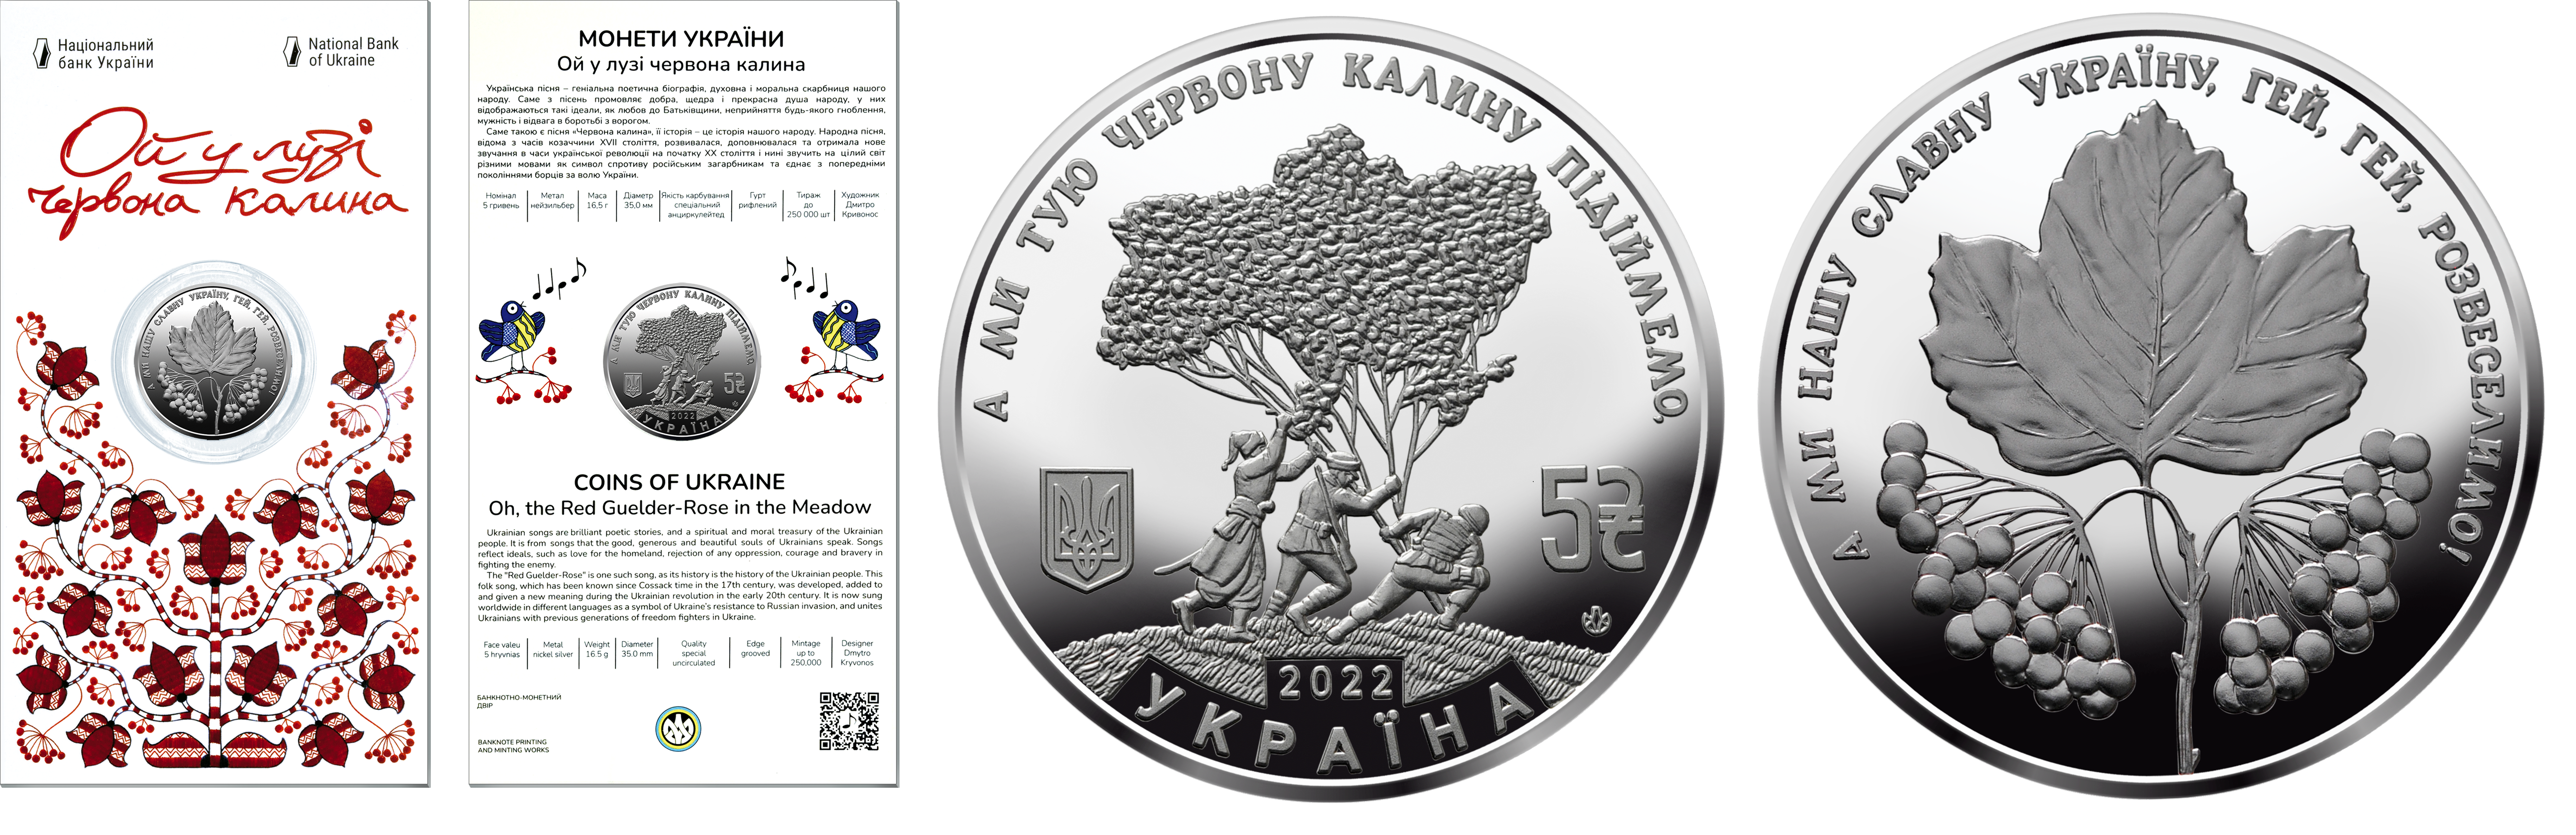 Sale of commemorative coins from MTB BANK • buy commemorative coins in Ukraine at MTB BANK - photo 7 - mtb.ua